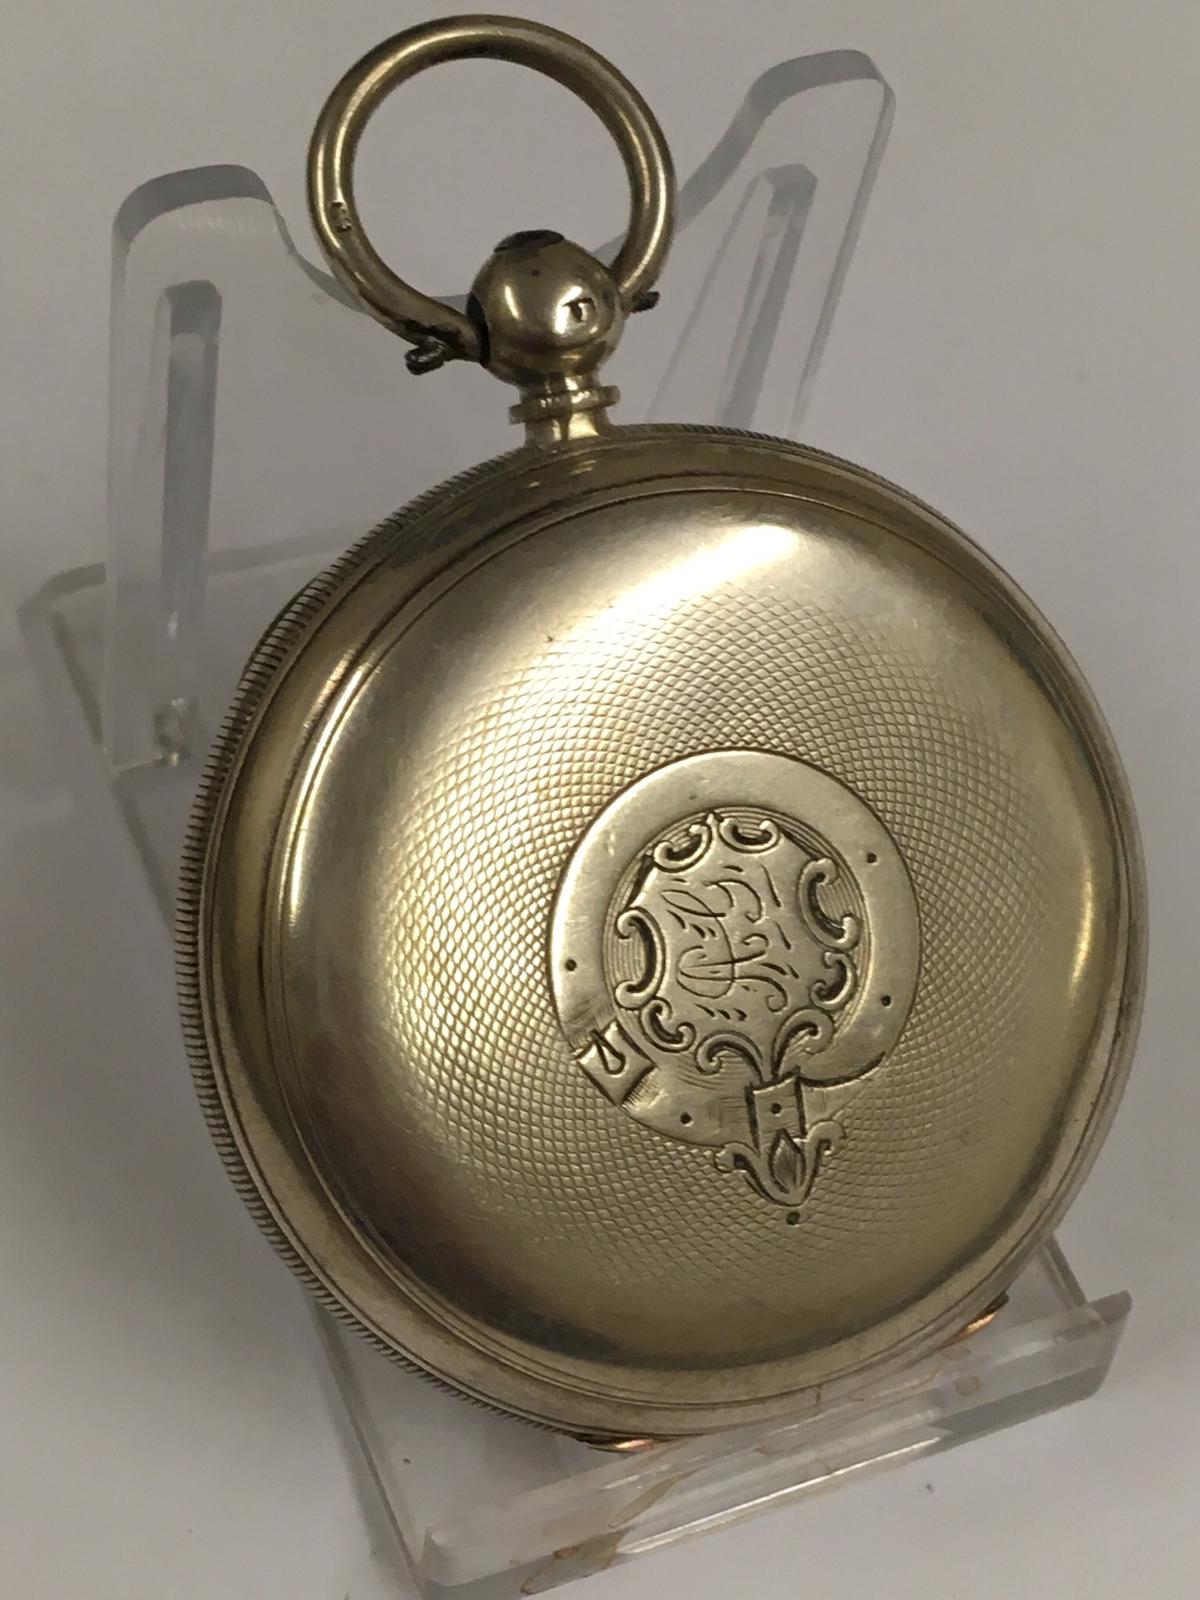 Antique silver lever pocket watch ( Coventry ). Ticks if shaken but no key . Sold with no guarantees - Image 2 of 11